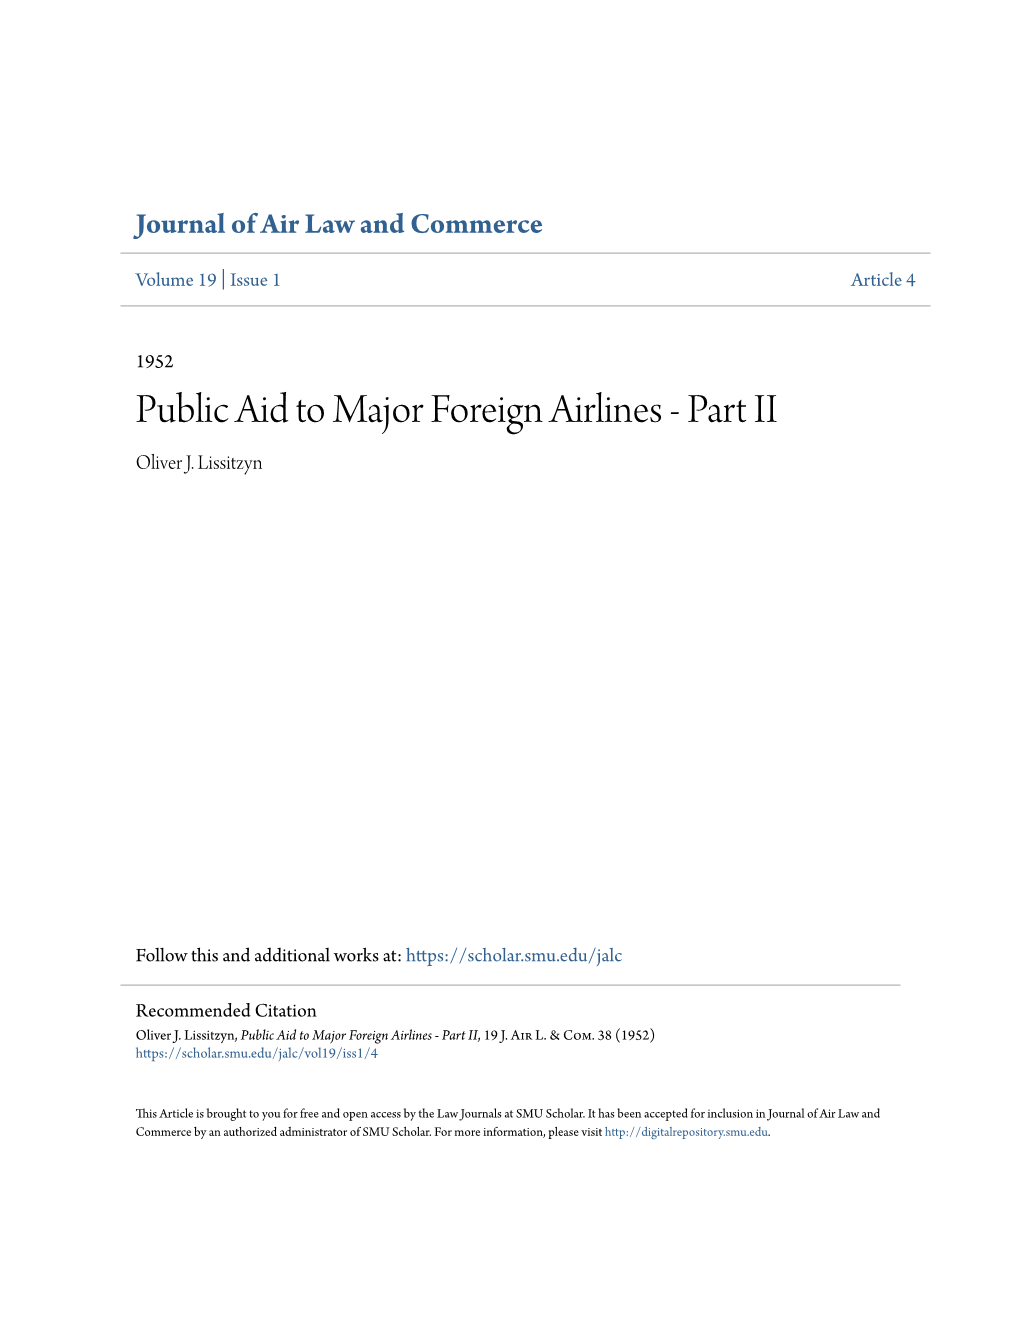 Public Aid to Major Foreign Airlines - Part II Oliver J